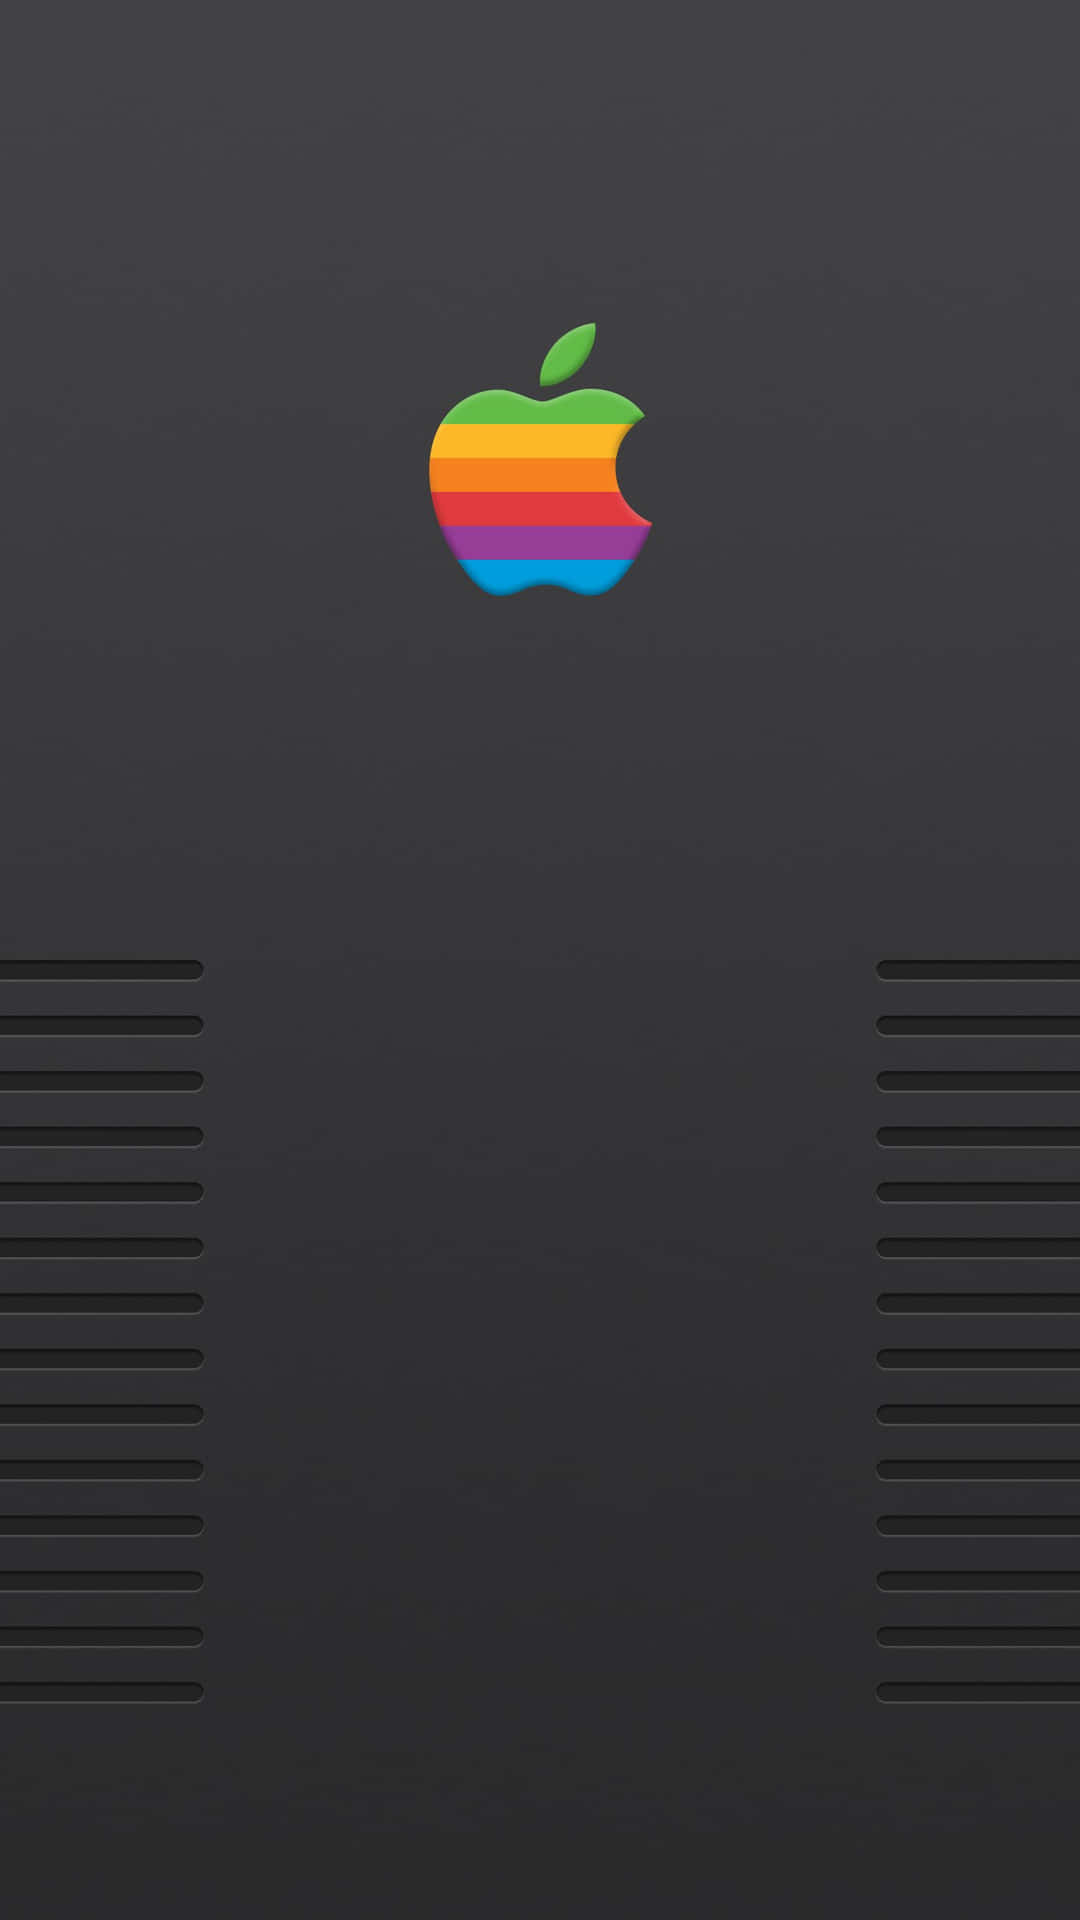 Feel Nostalgic With This Retro Iphone Look. Background